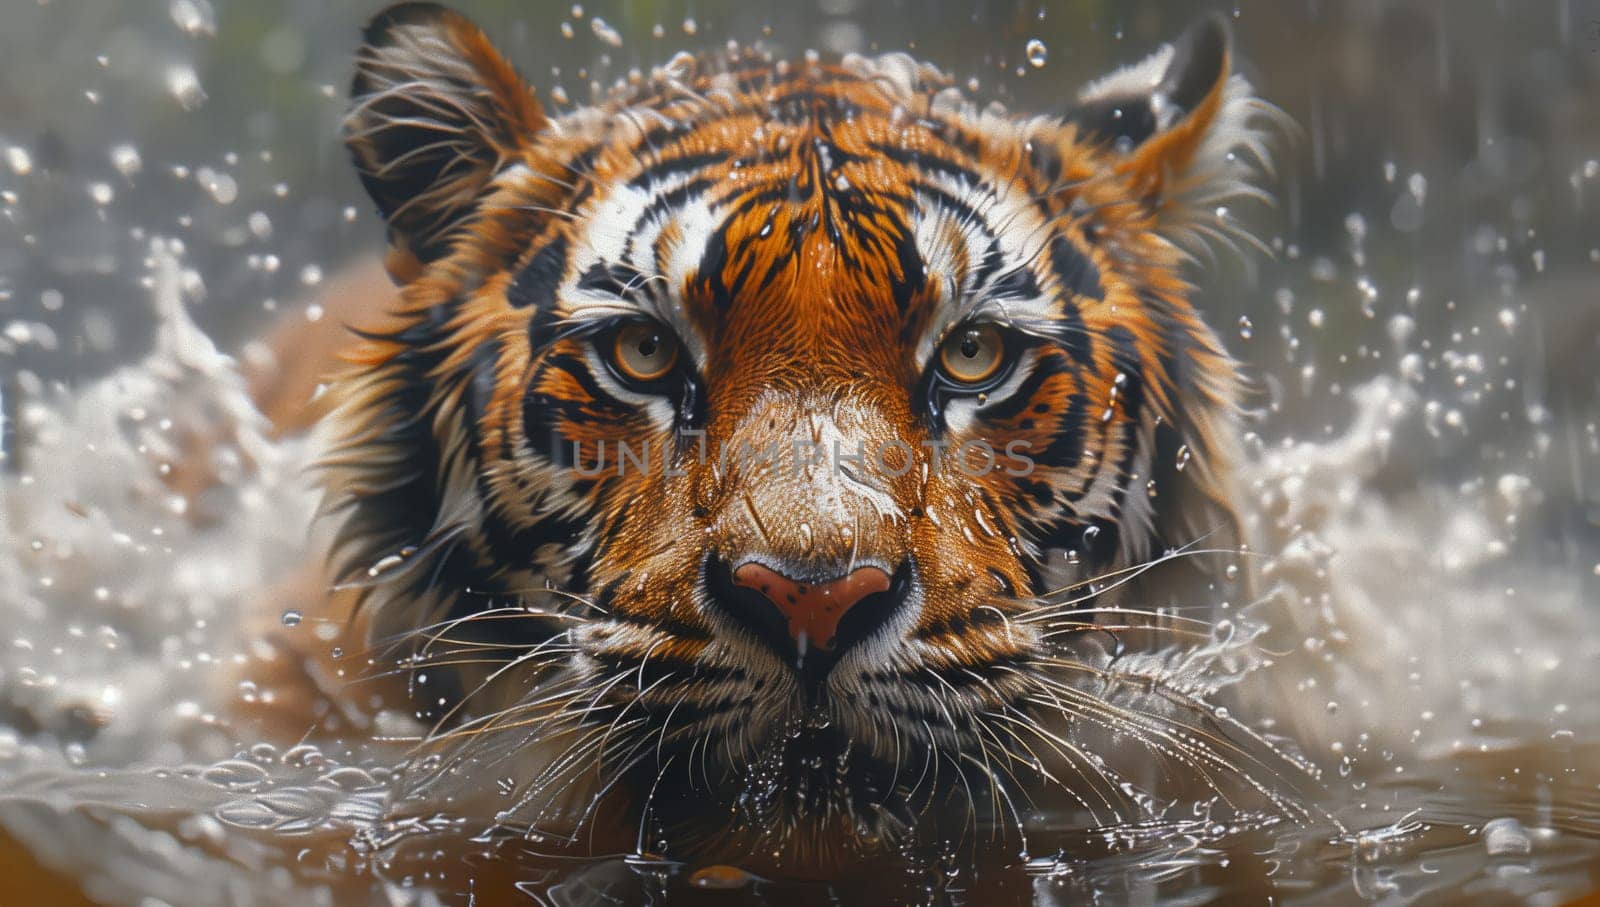 A Bengal tiger, a member of the Felidae family and a carnivorous terrestrial animal, is seen swimming in the water with whiskers glistening, staring directly into the camera